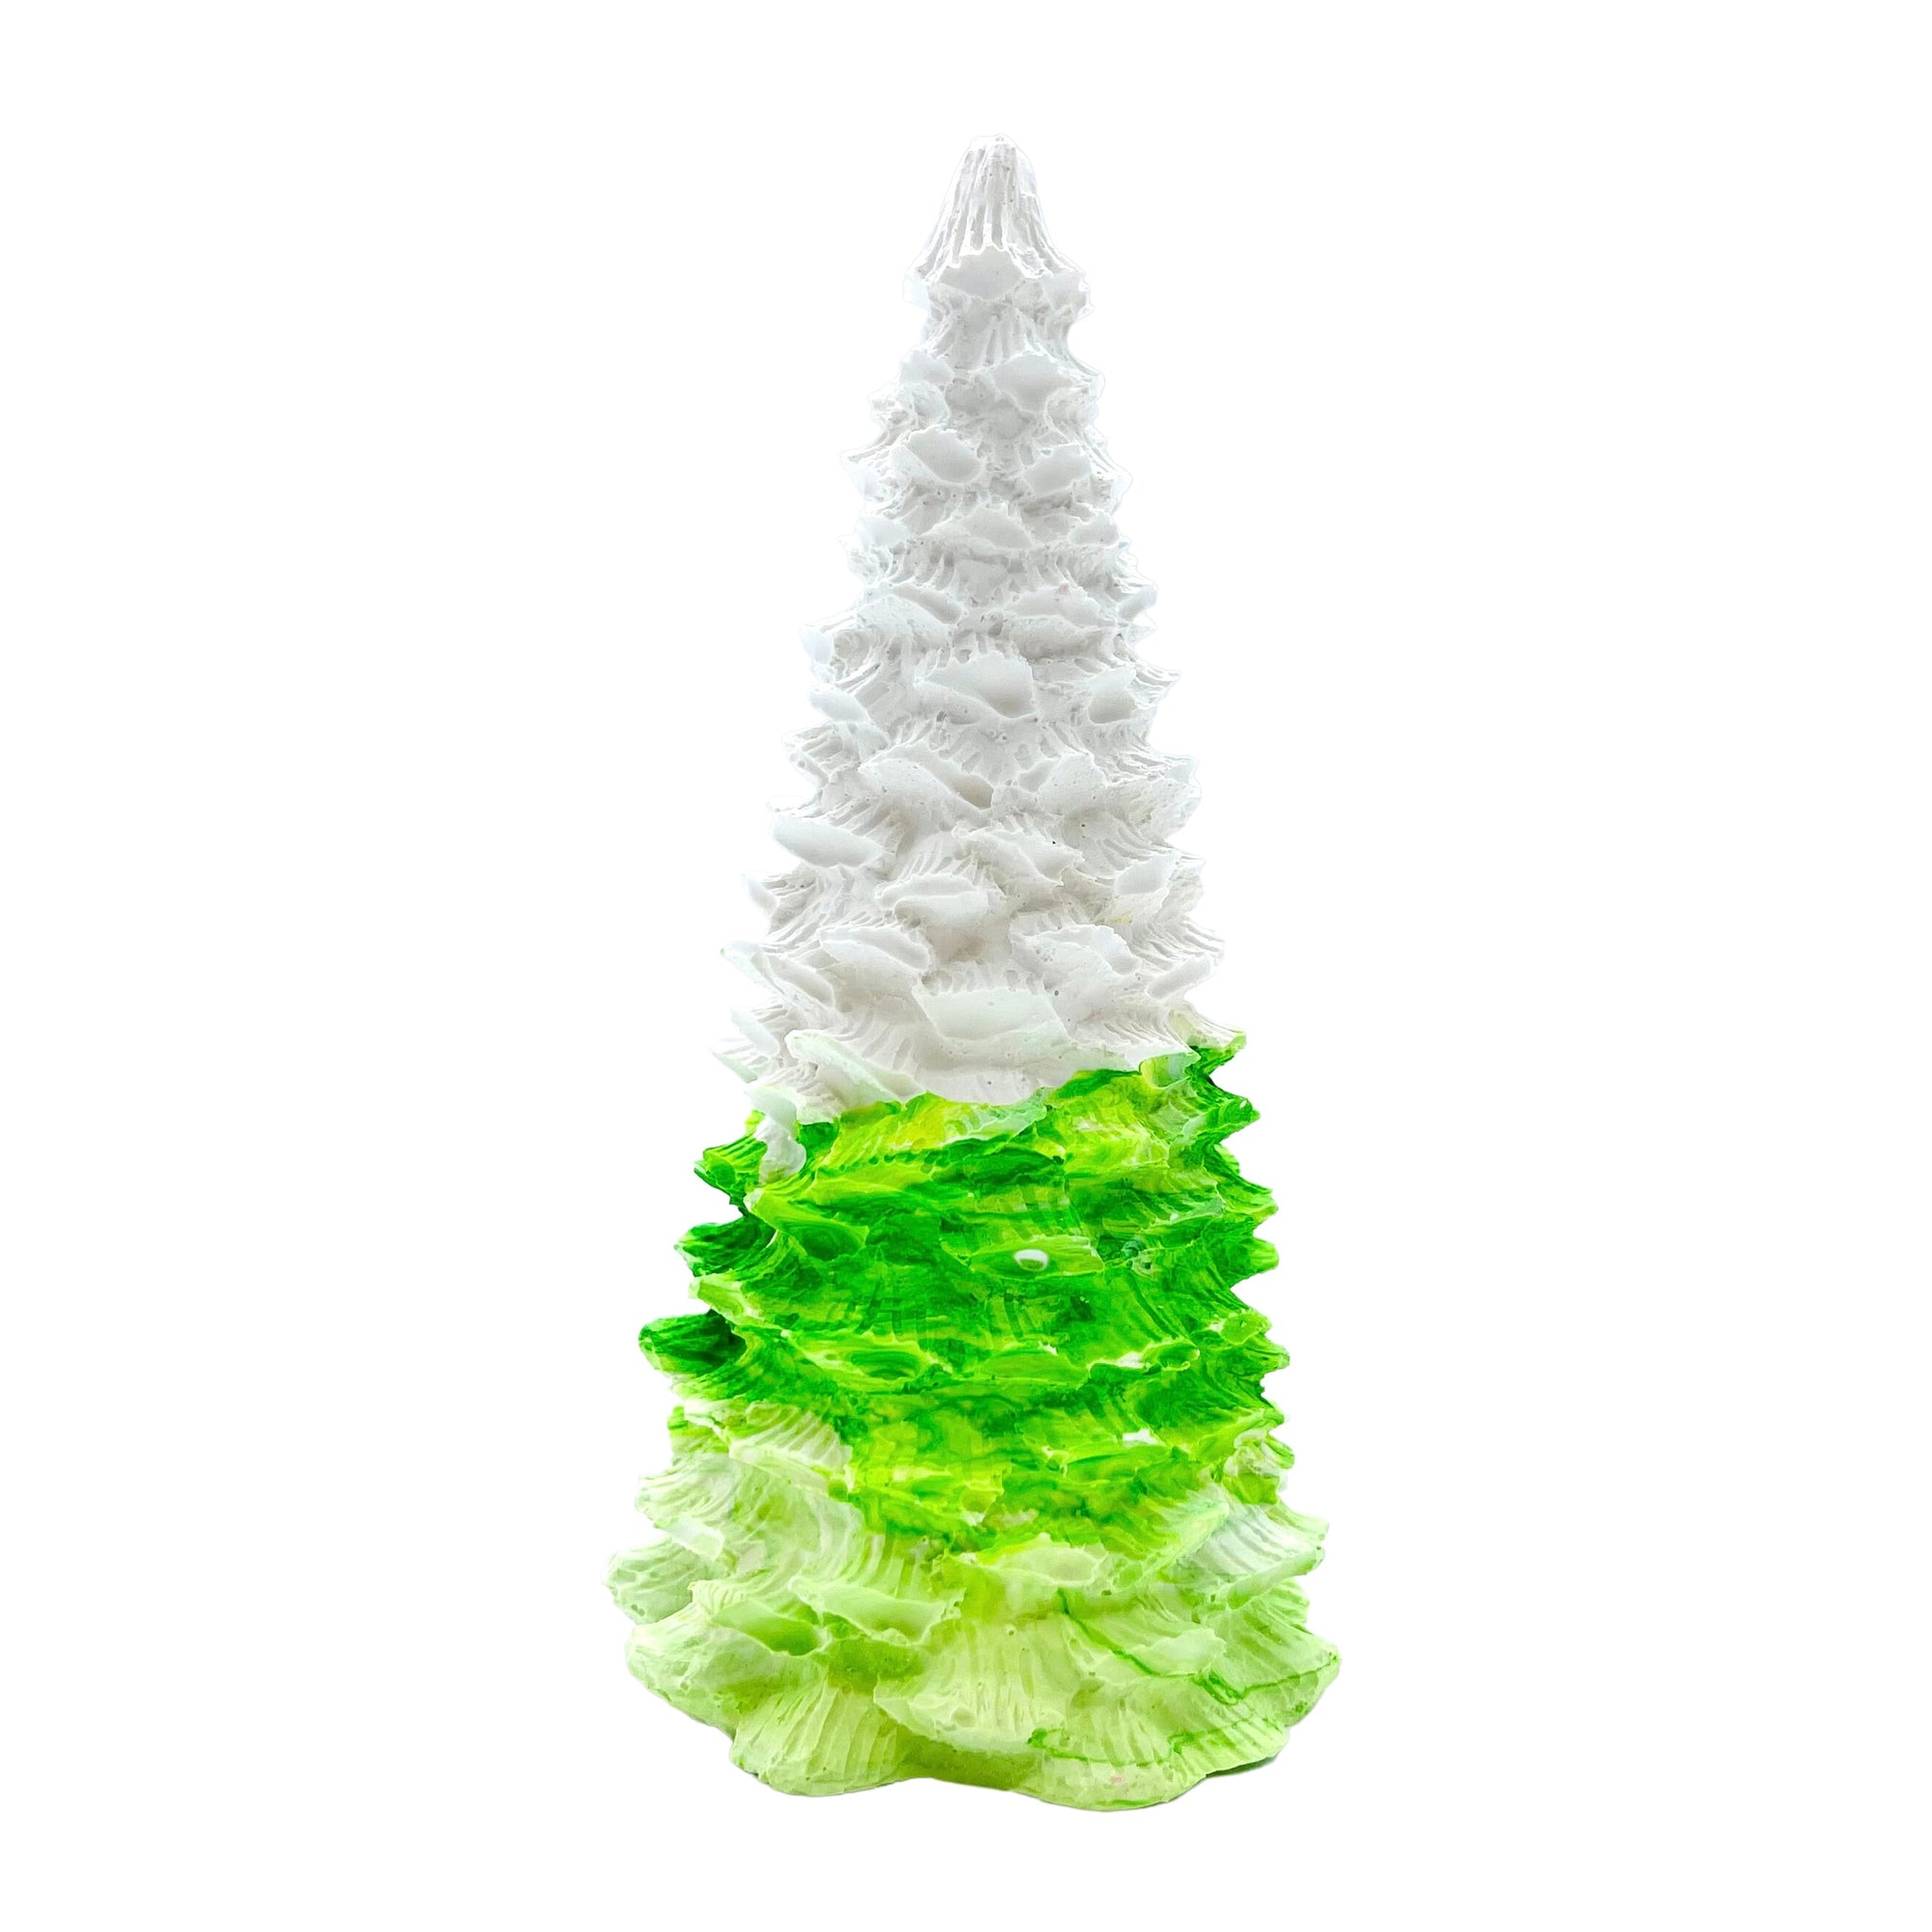 This tall Jesmonite Christmas tree measures 13.5cm in height and has been marbled with green and white pigment.